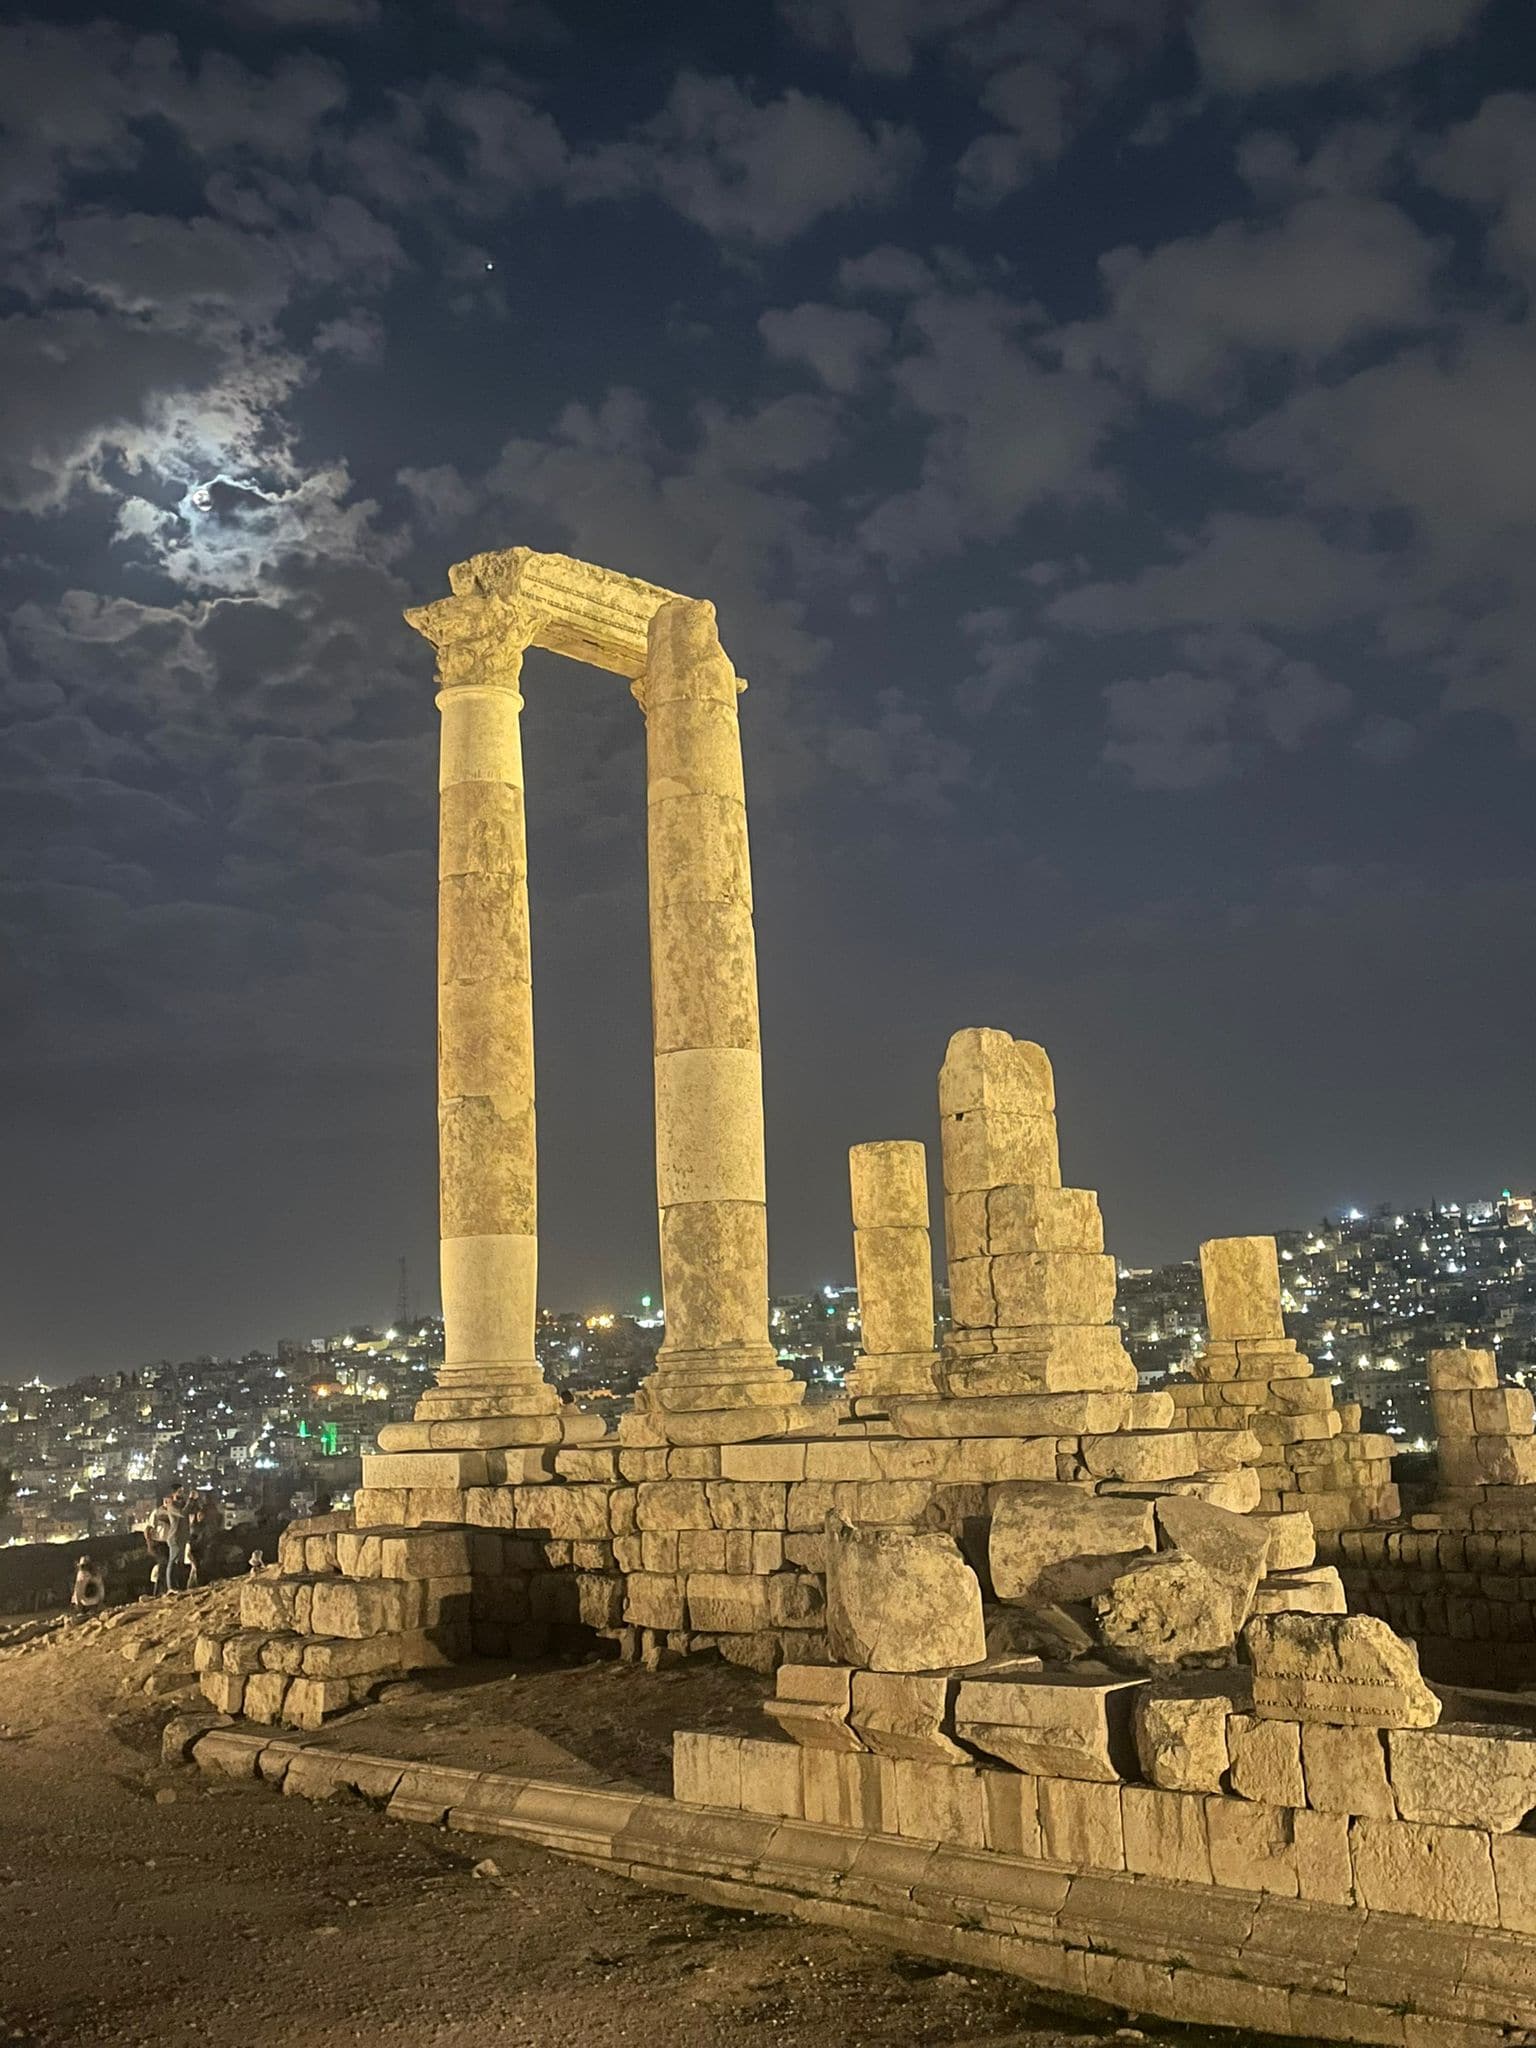 The Temple of Hercules at Amman Citadel with the city lights and moonlight in the background creating a stunning backdrop shortly after the sun had set